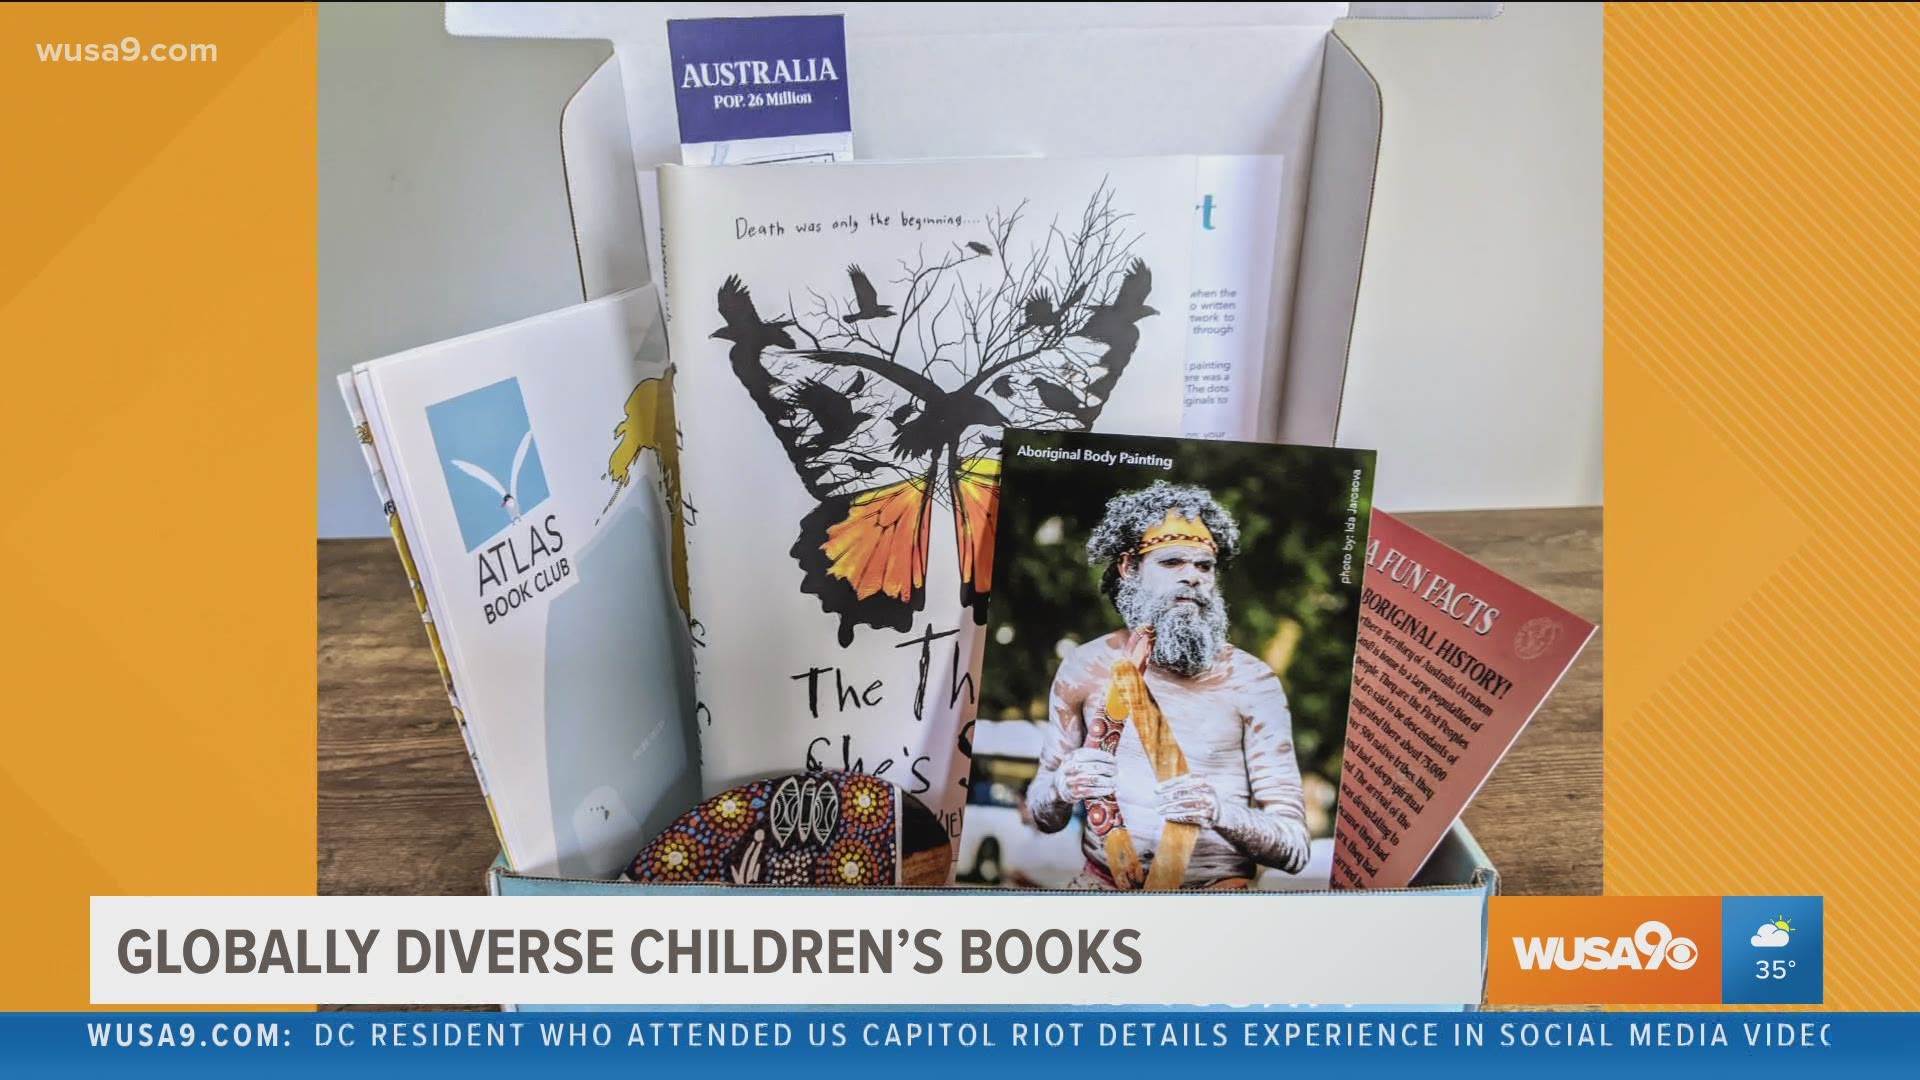 Bunmi Emenanjo, founder and CEO of Atlas Book Club shares how to expose children to diverse cultures through books.